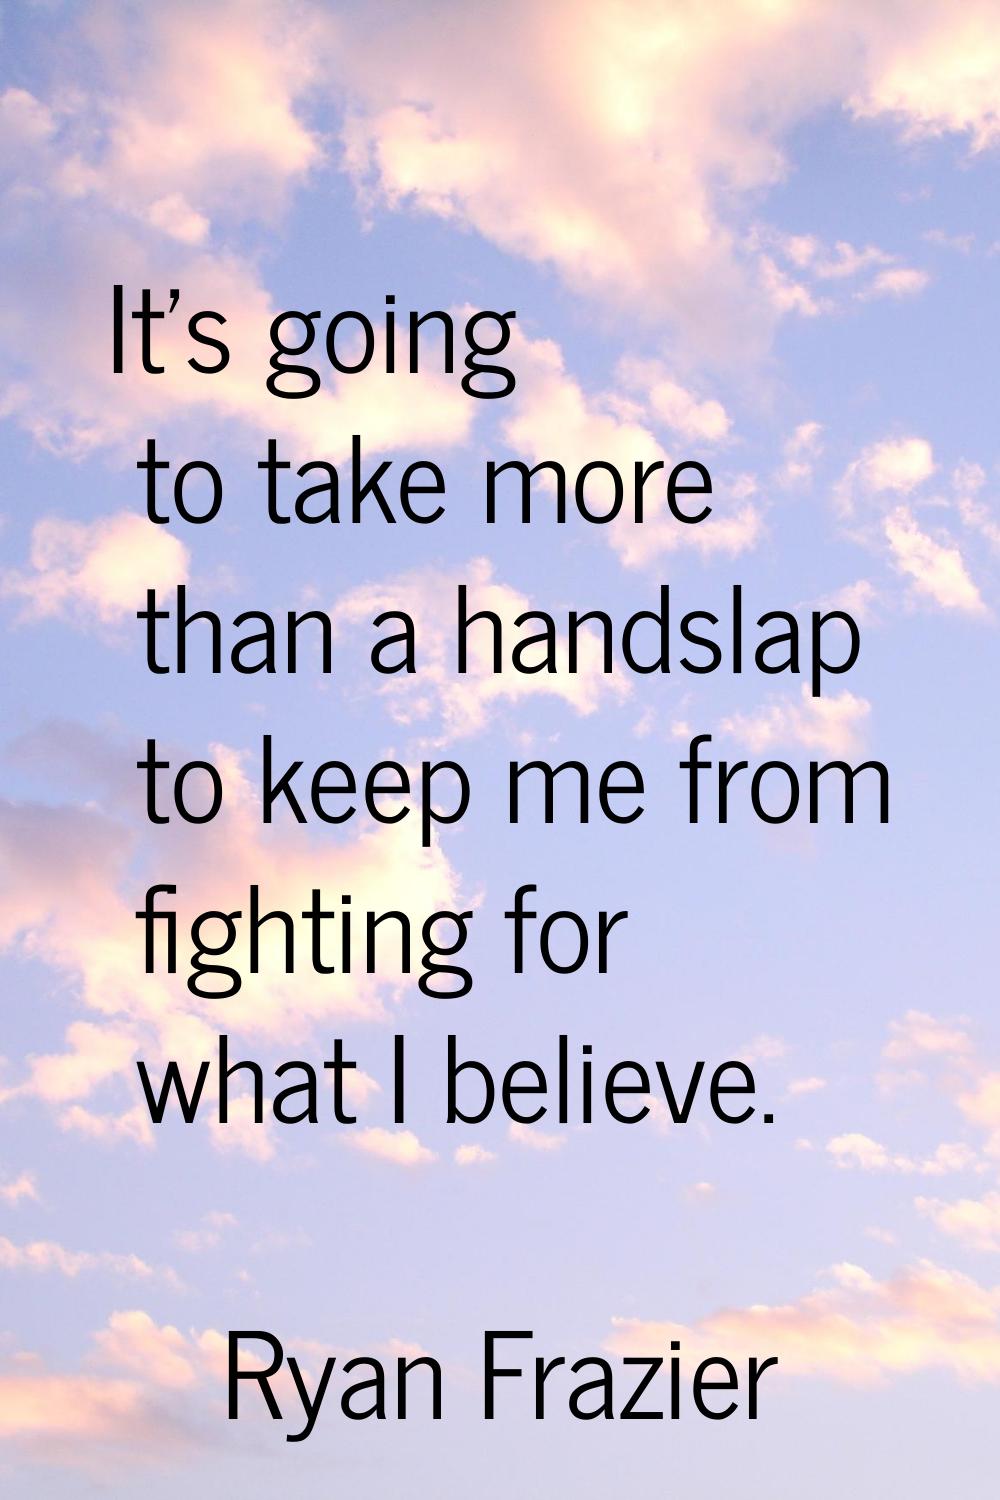 It's going to take more than a handslap to keep me from fighting for what I believe.